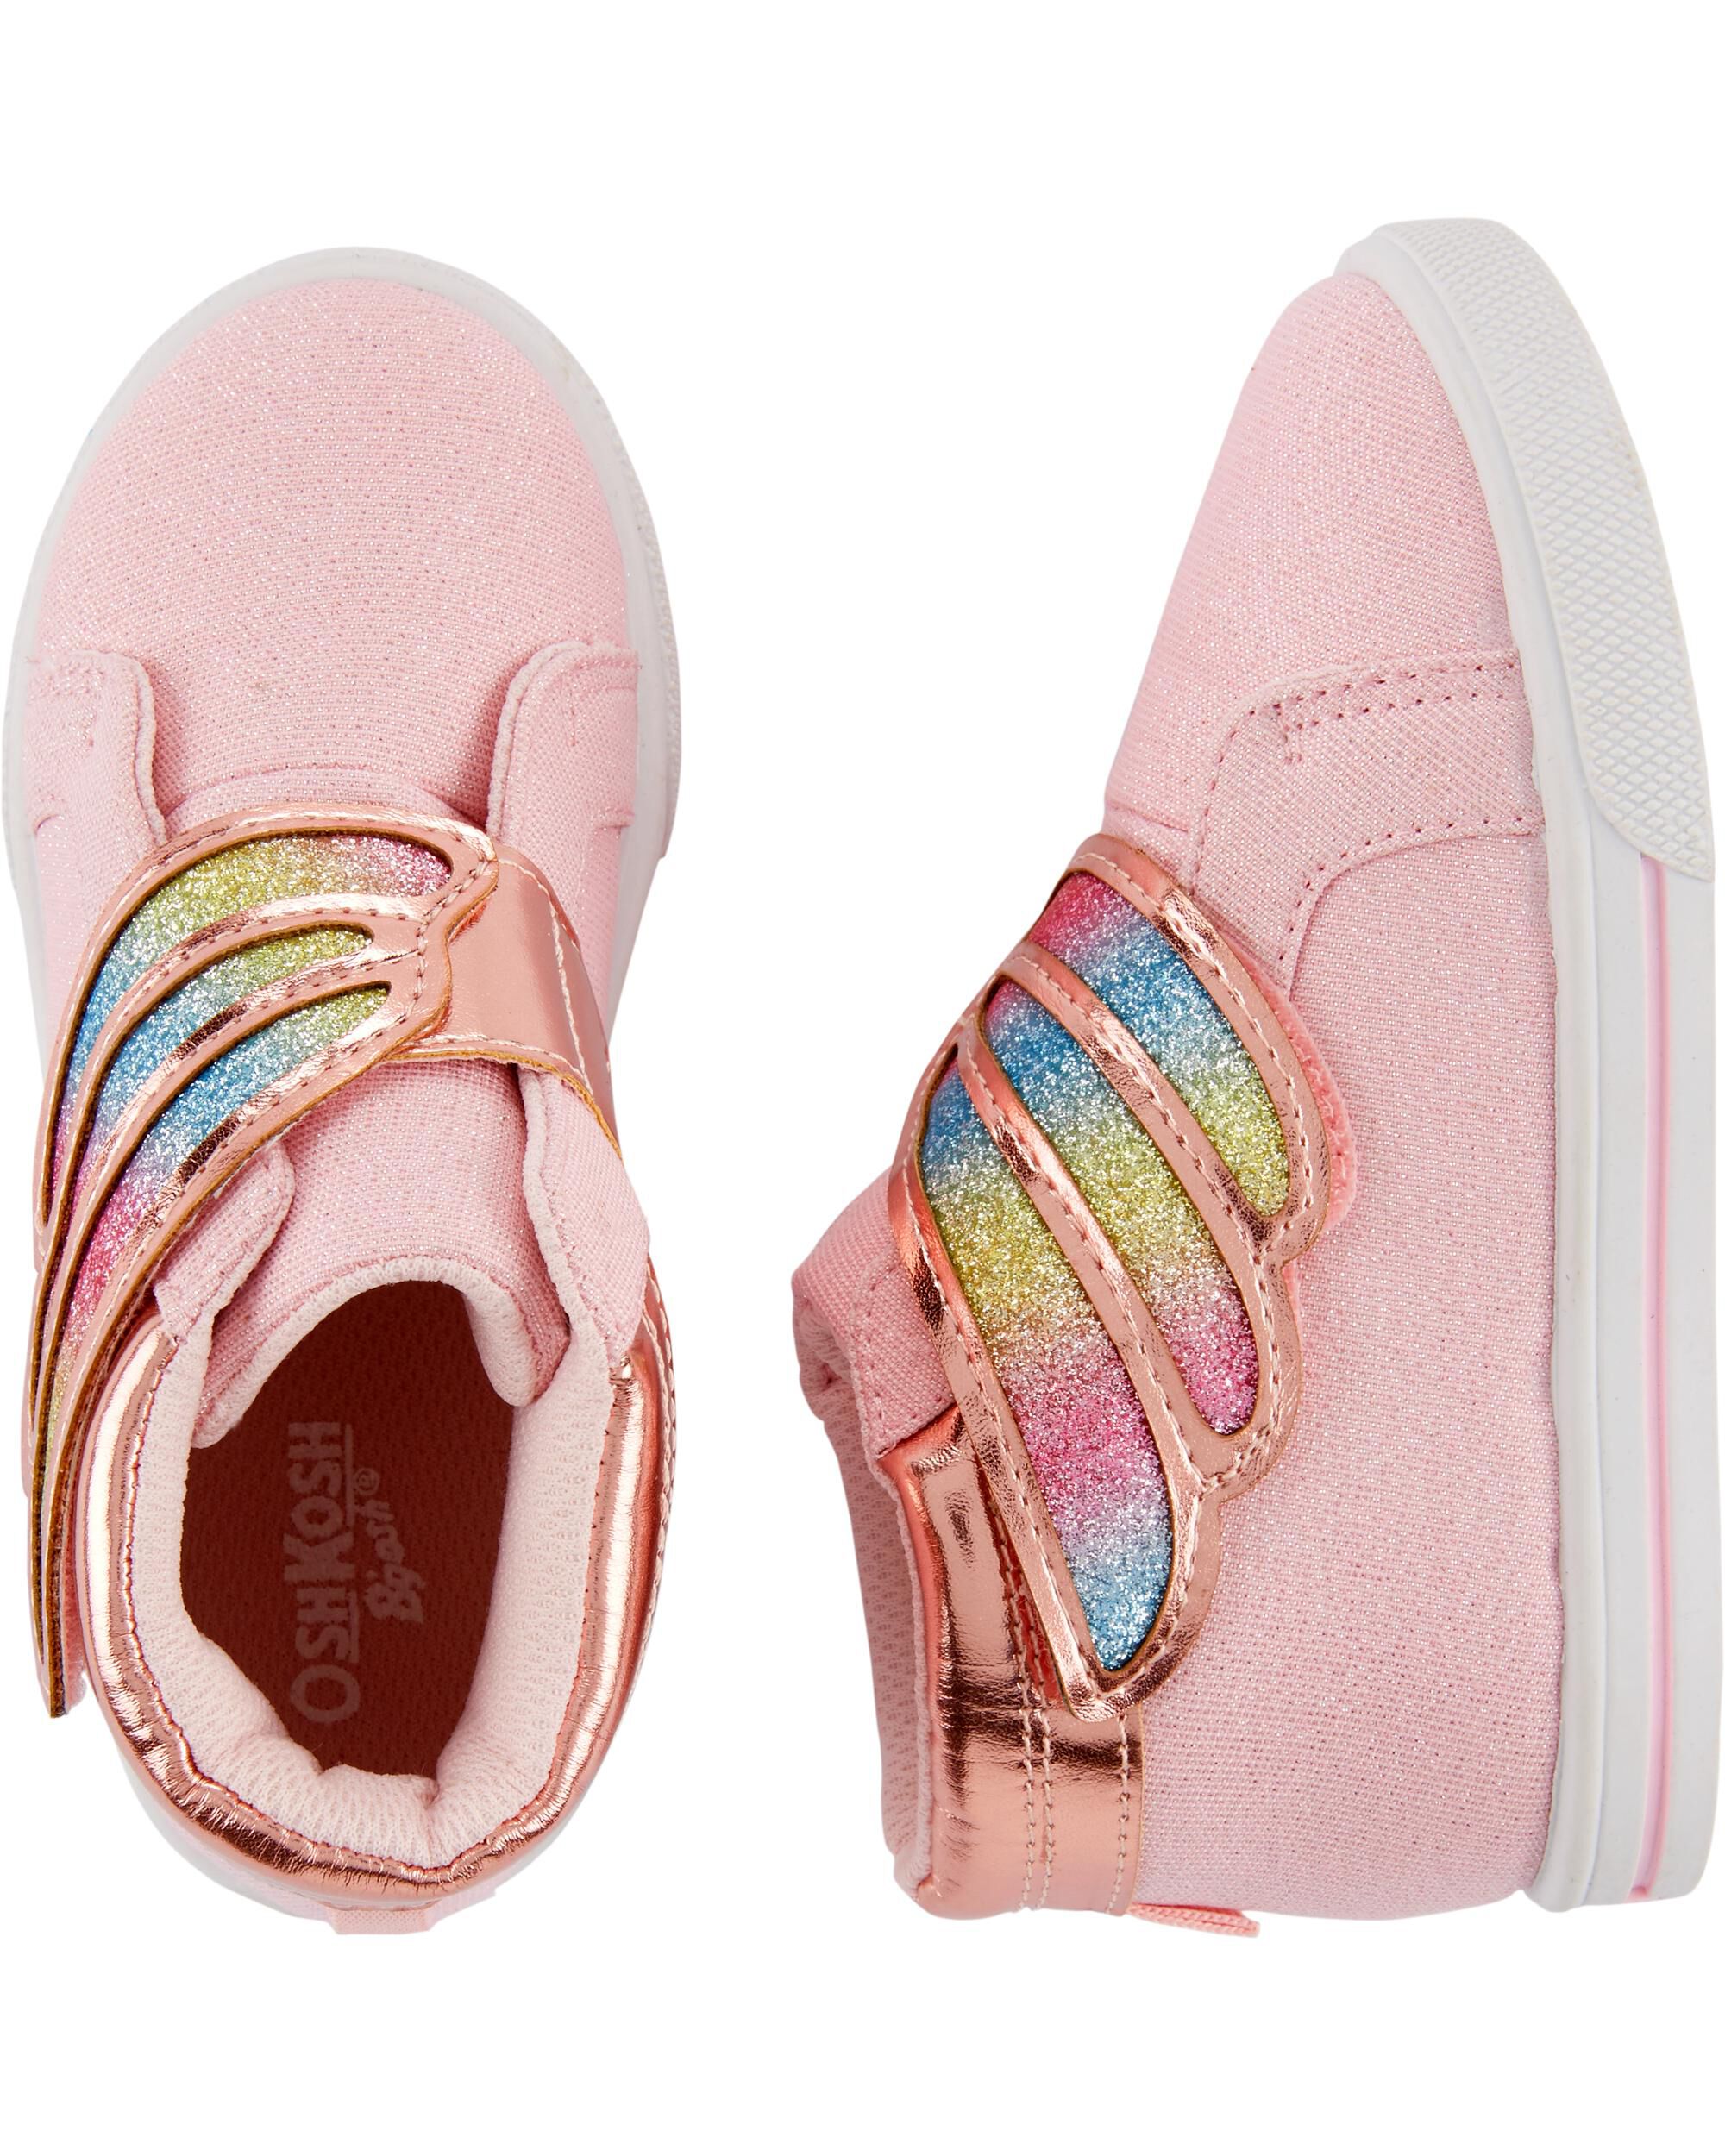 carters rainbow shoes